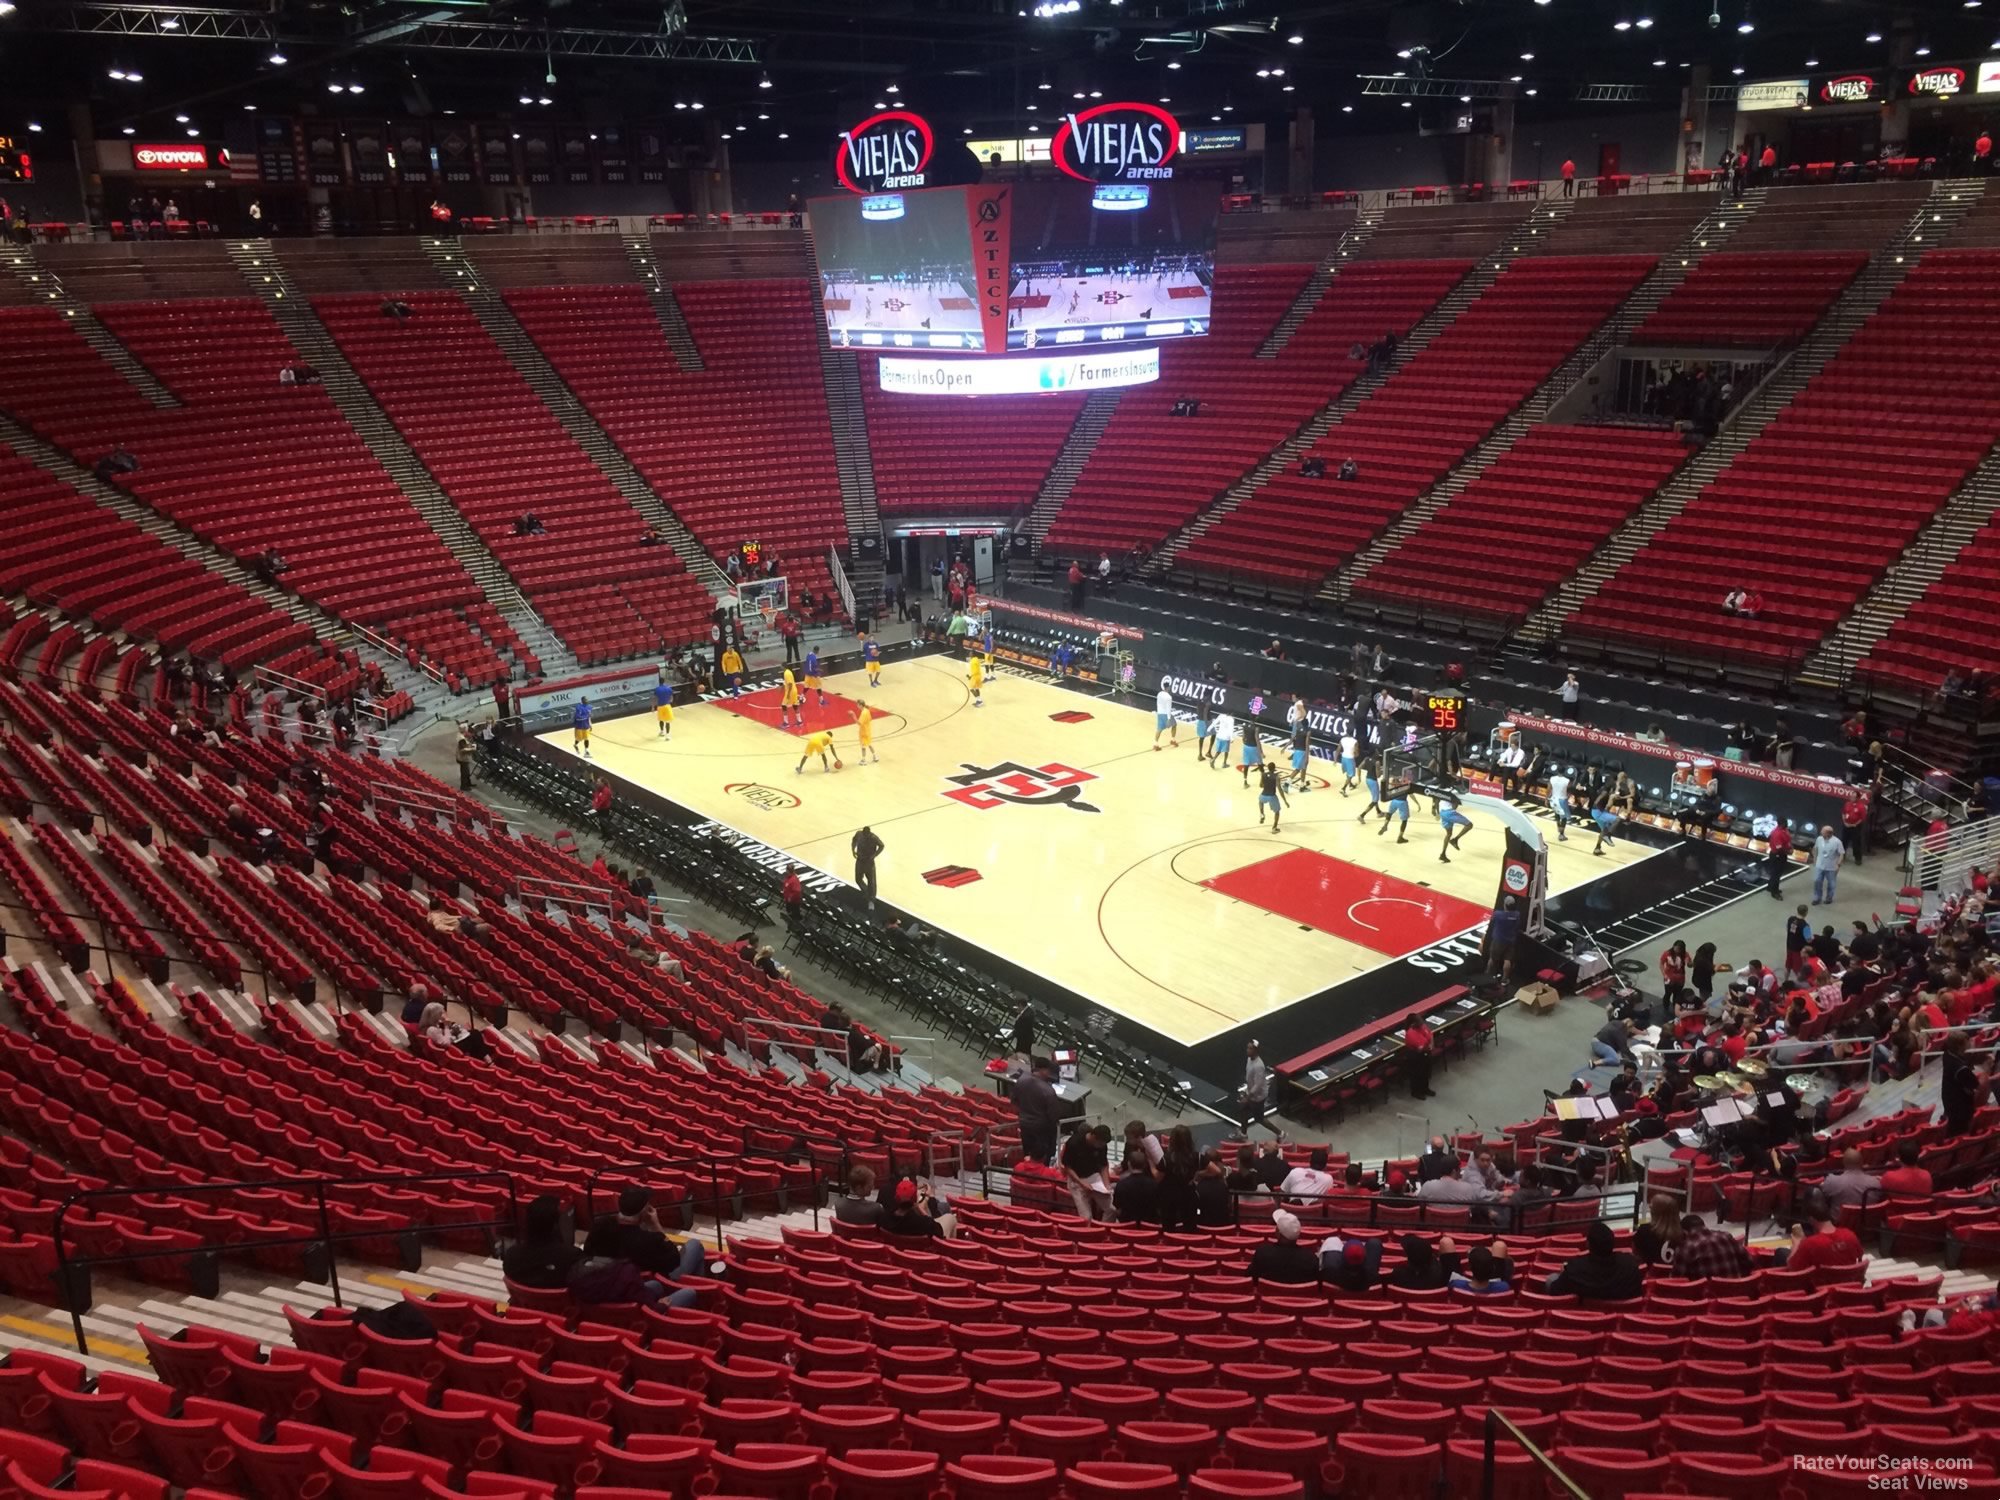 section j, row 30 seat view  - viejas arena